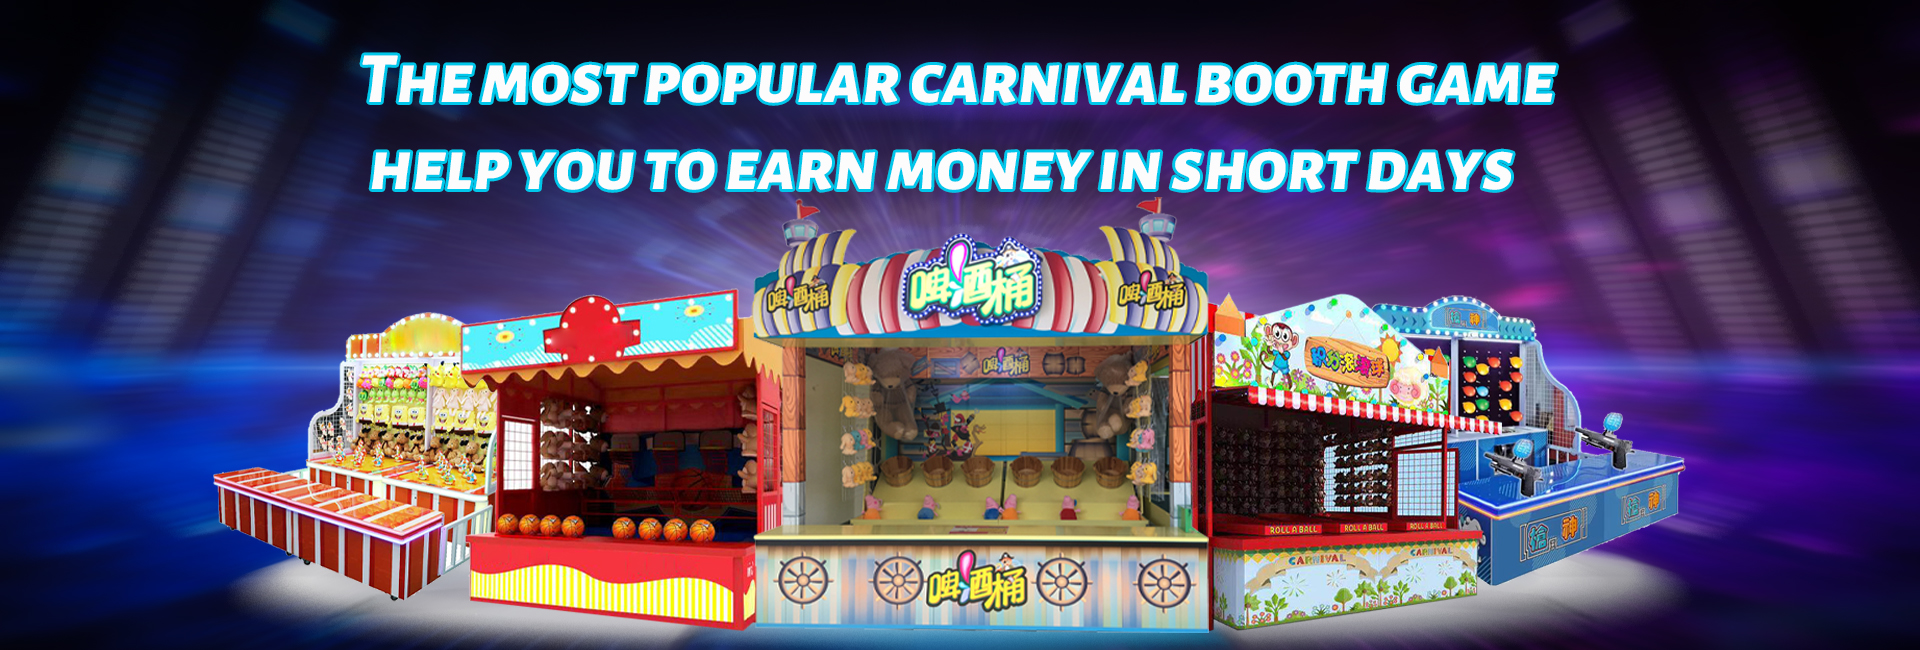 The Live Show For Carnival Game Booth|Carnival Fair Game Booth Made In China